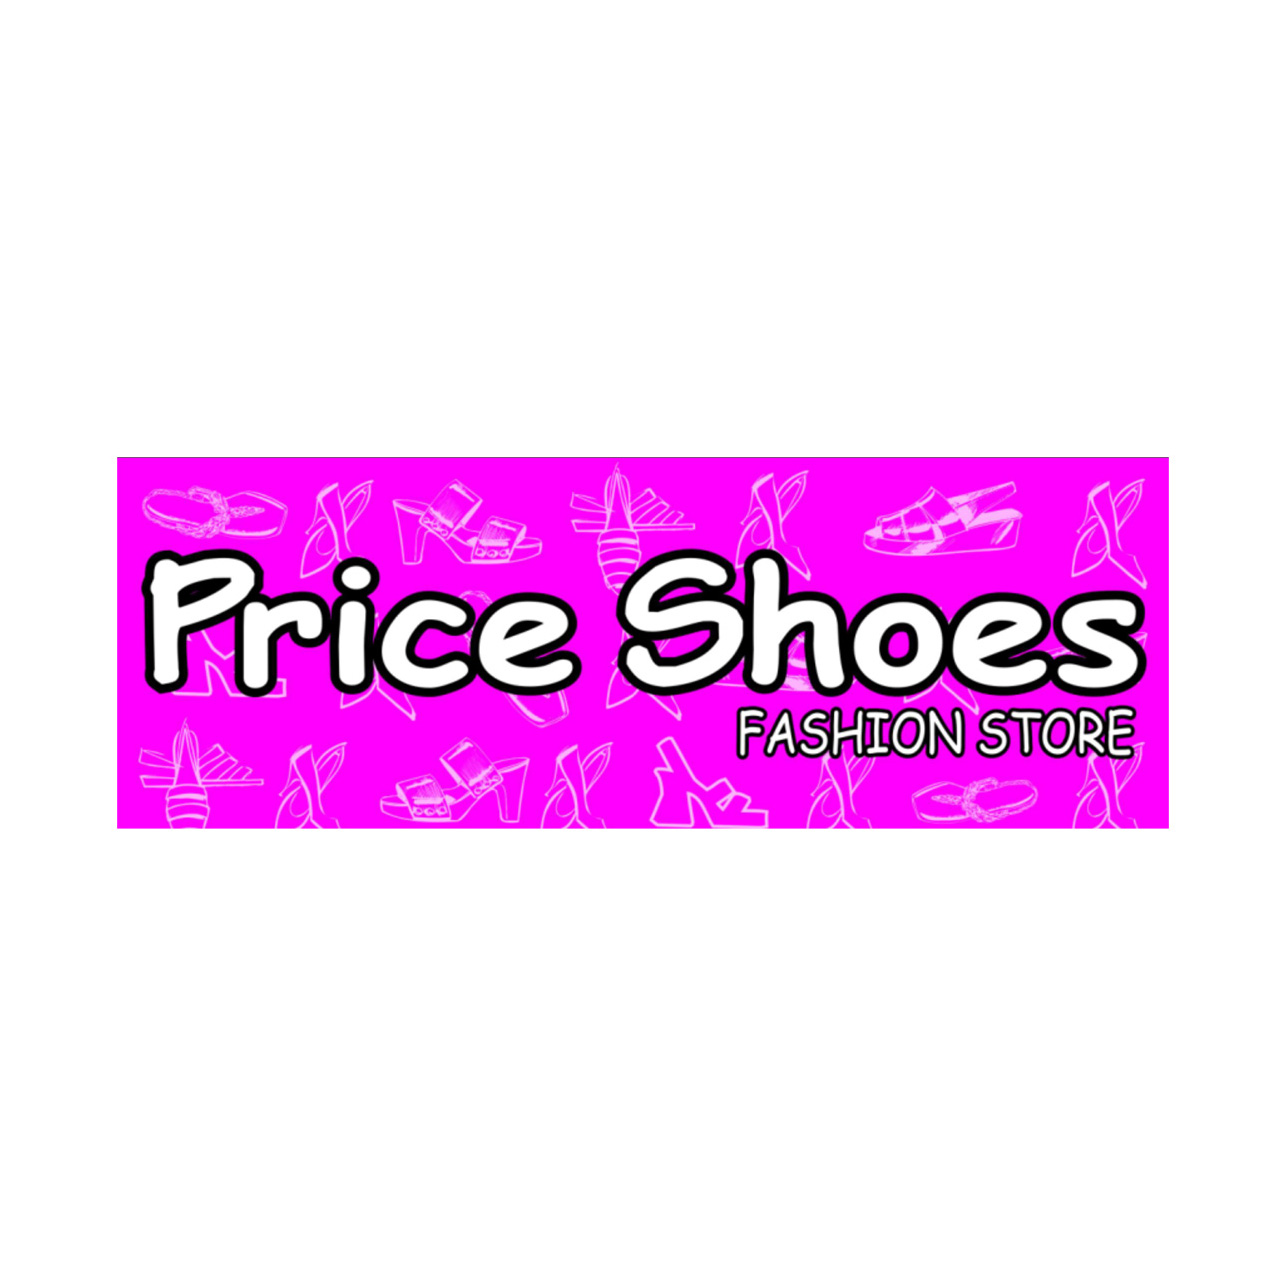 Price Shoes - Cosmocentro